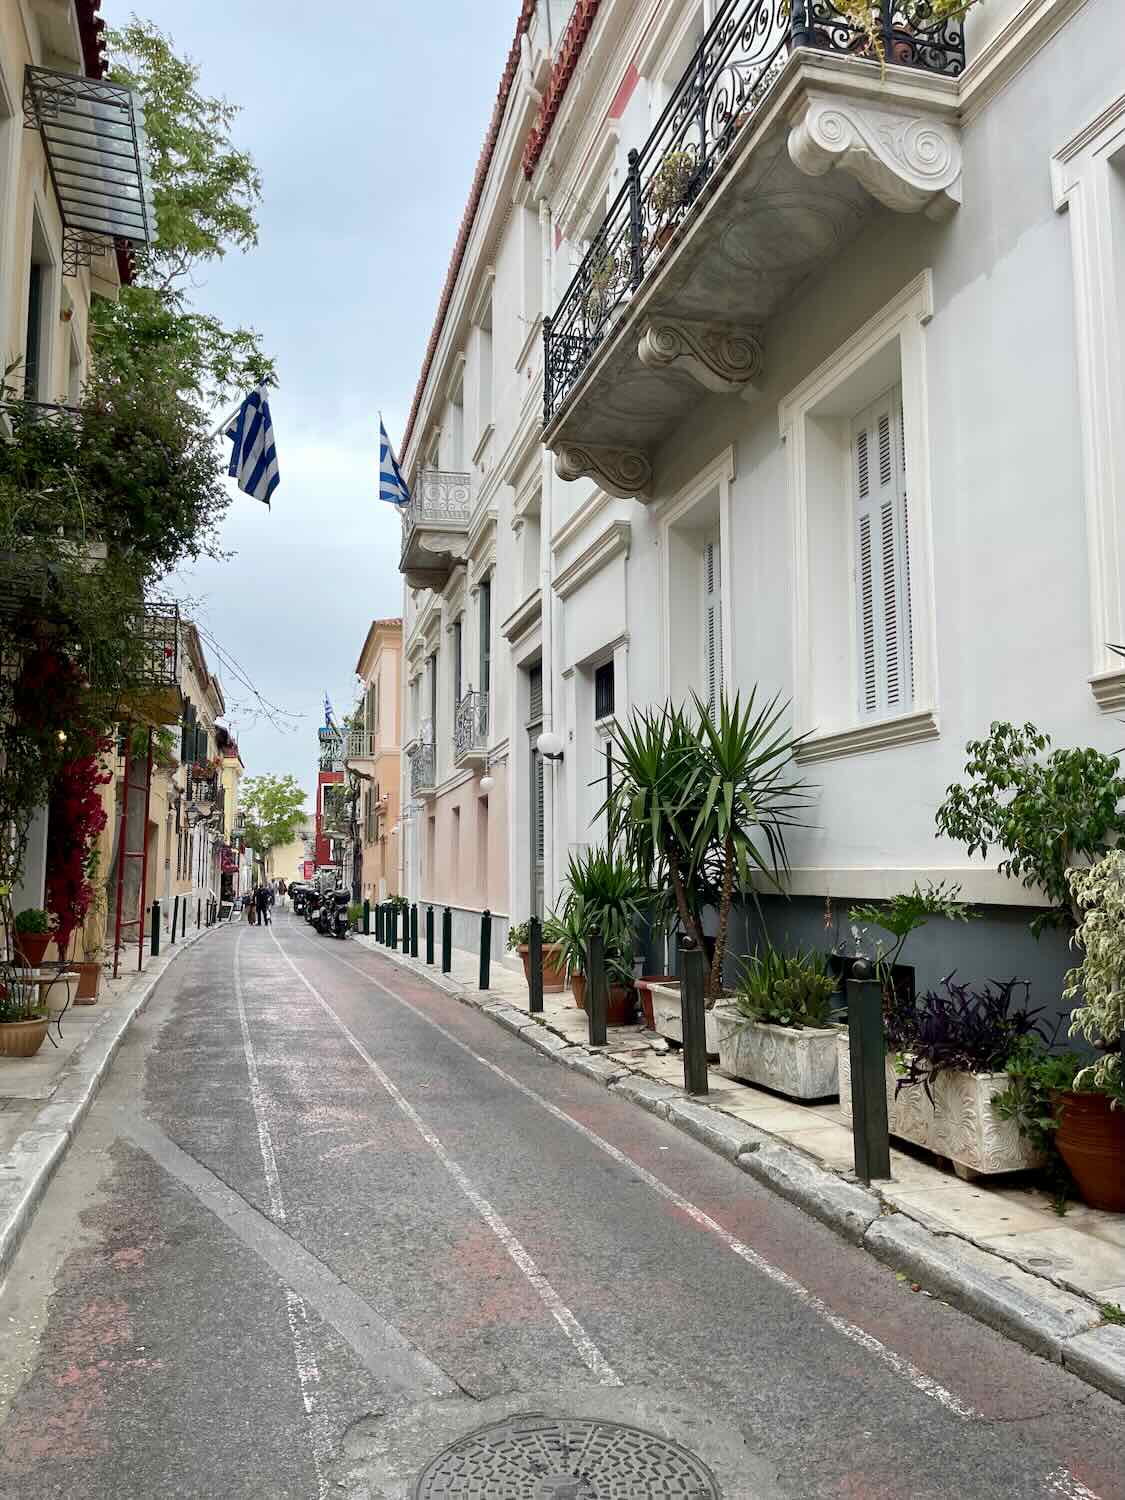 A narrow street in Athens lined with potted plants and classic buildings with balconies. Greek flags are visible, and the street is calm and empty.